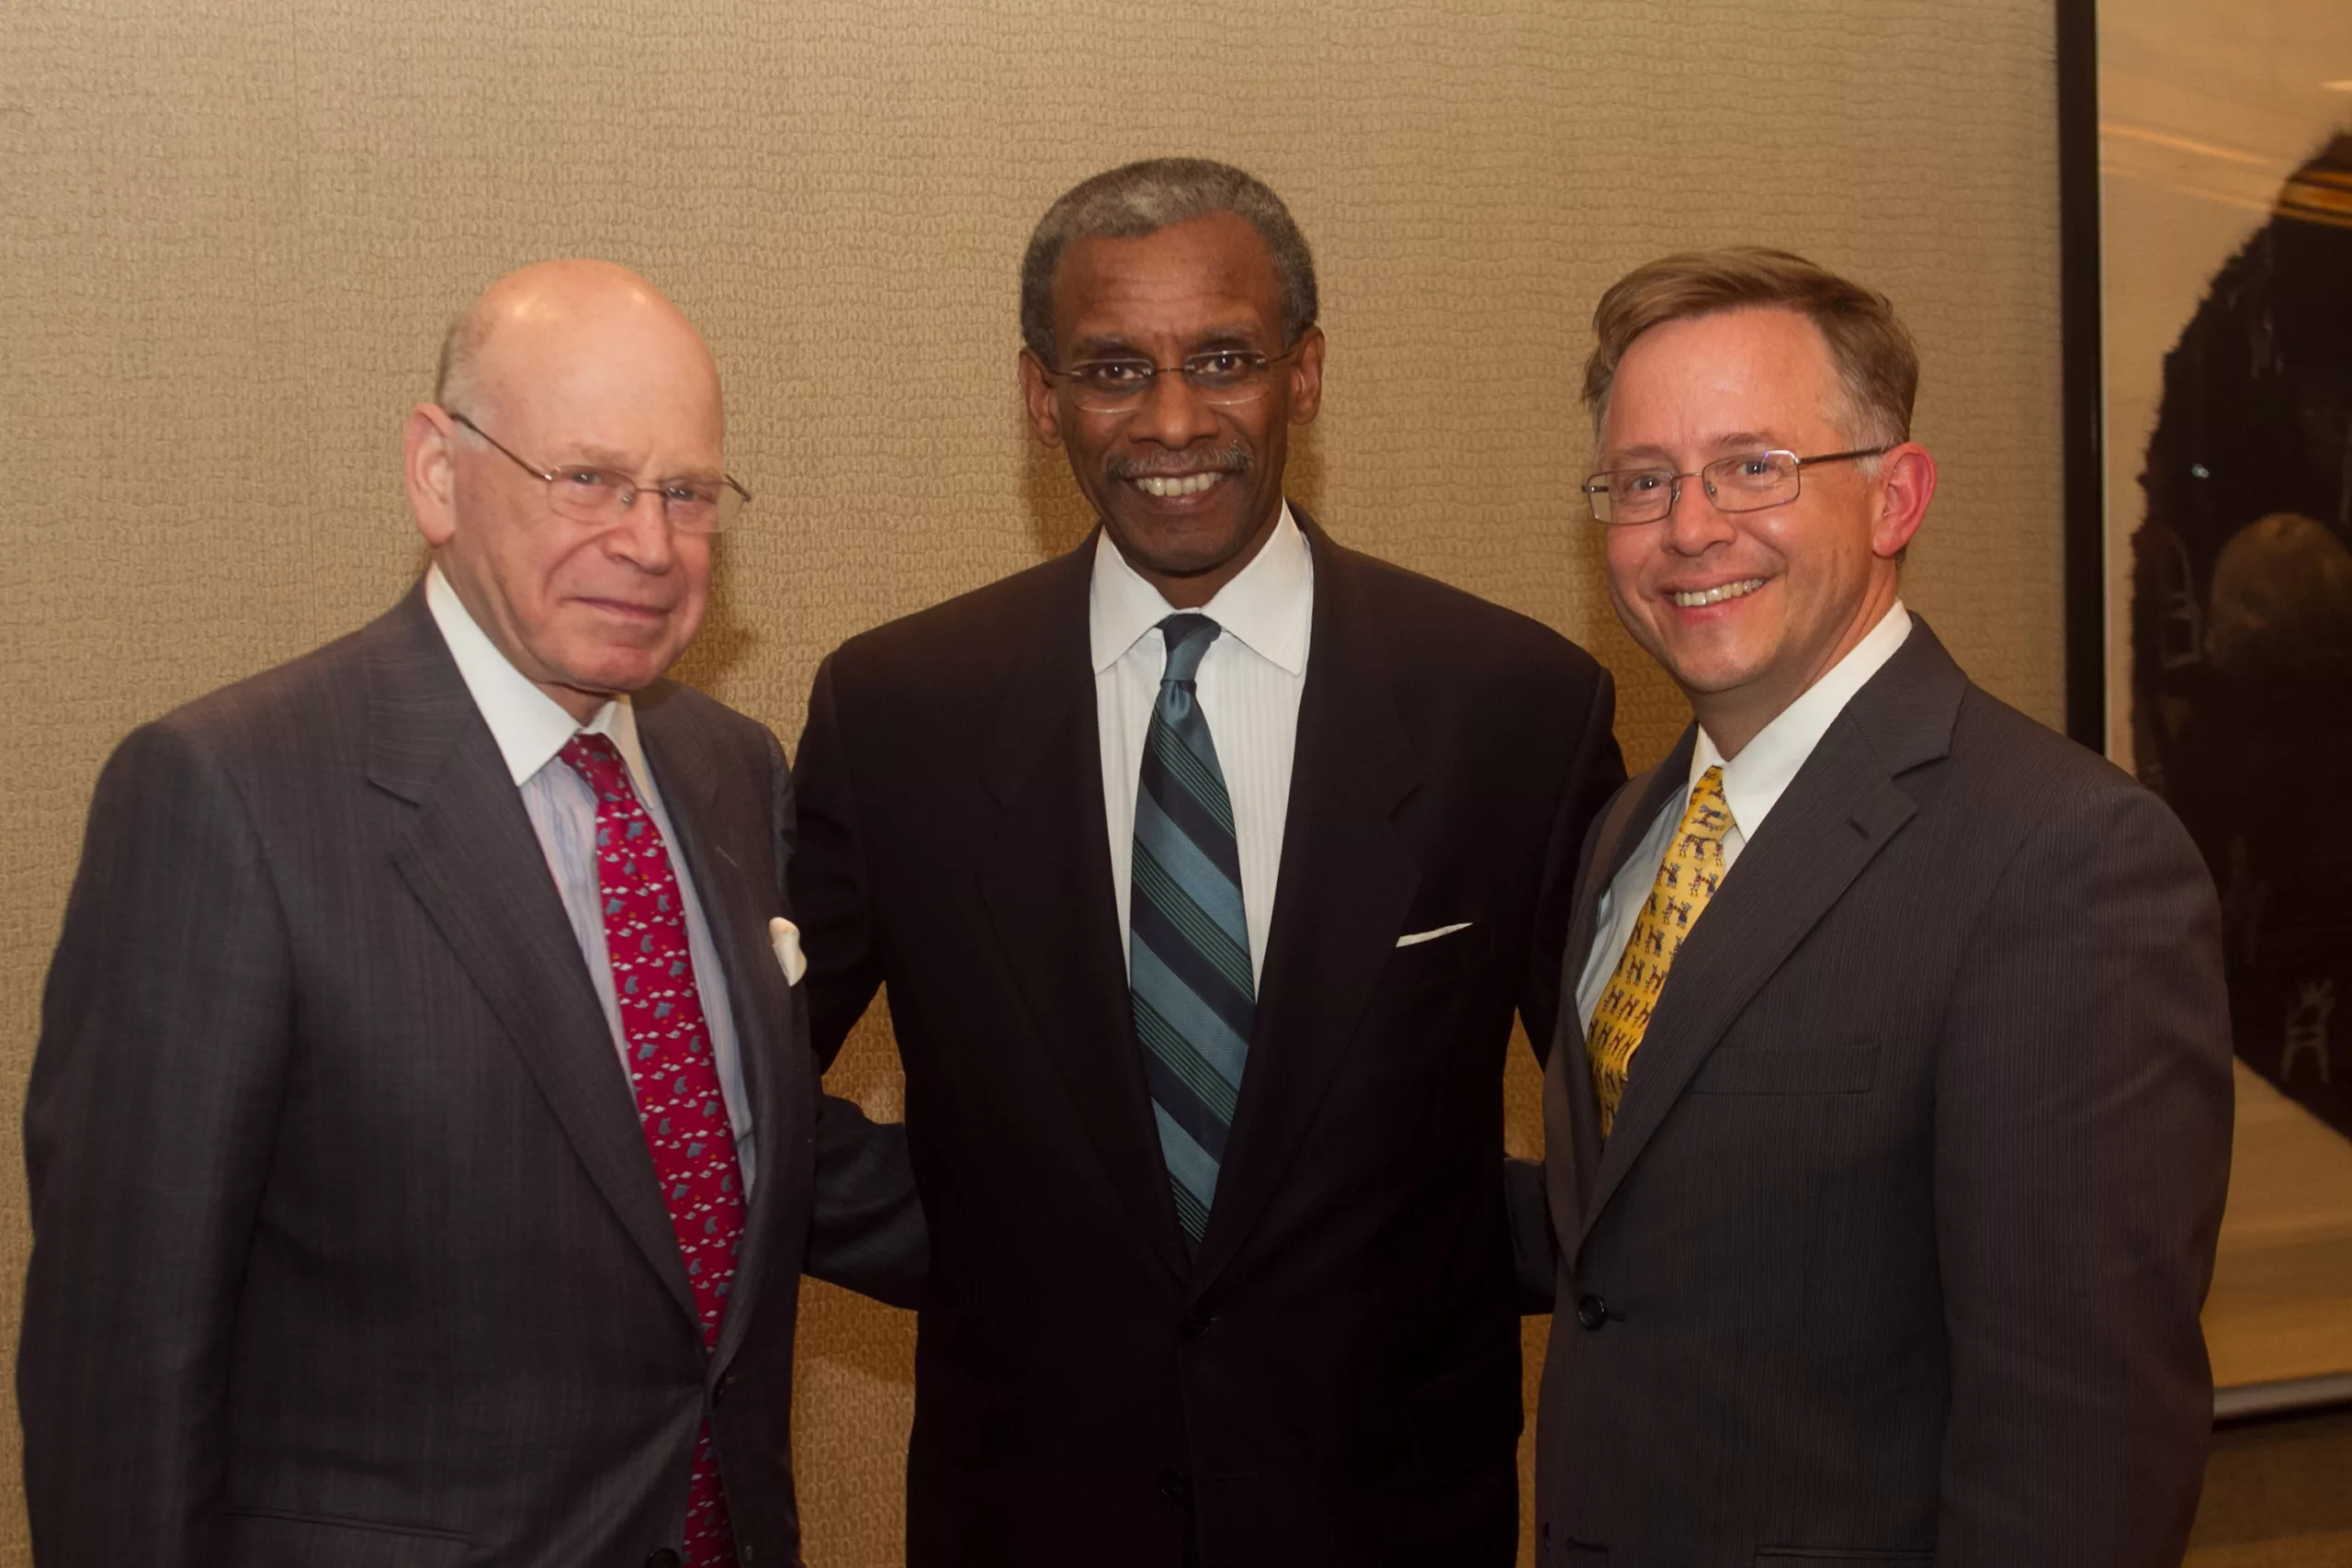 Honorees Robert Beal and  George A. Russell with MBHP Executive Director Chris Norris